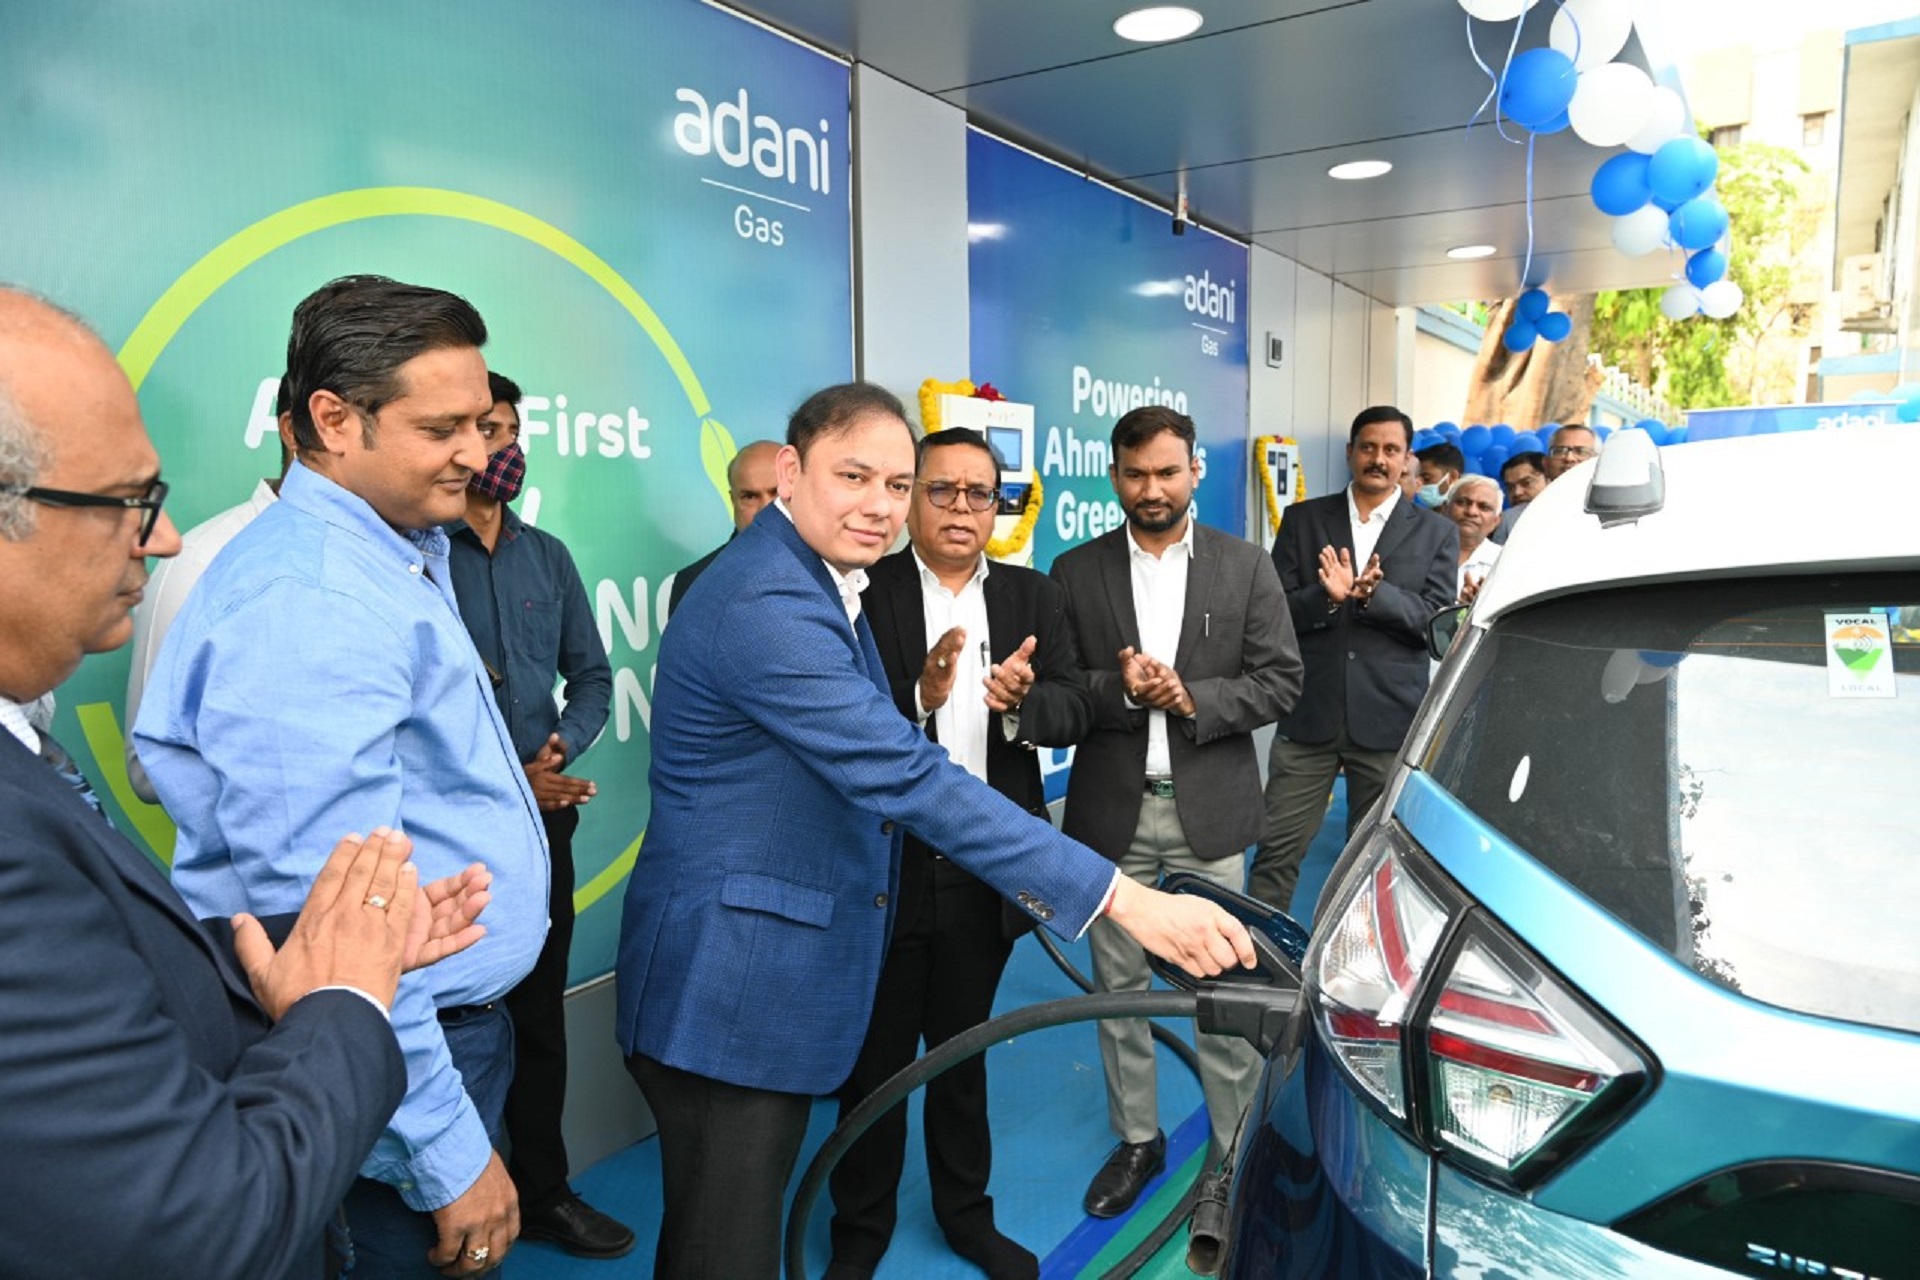 Adani Total Gas (ATGL) Enters EV Sector, Launches First EV Charging Station